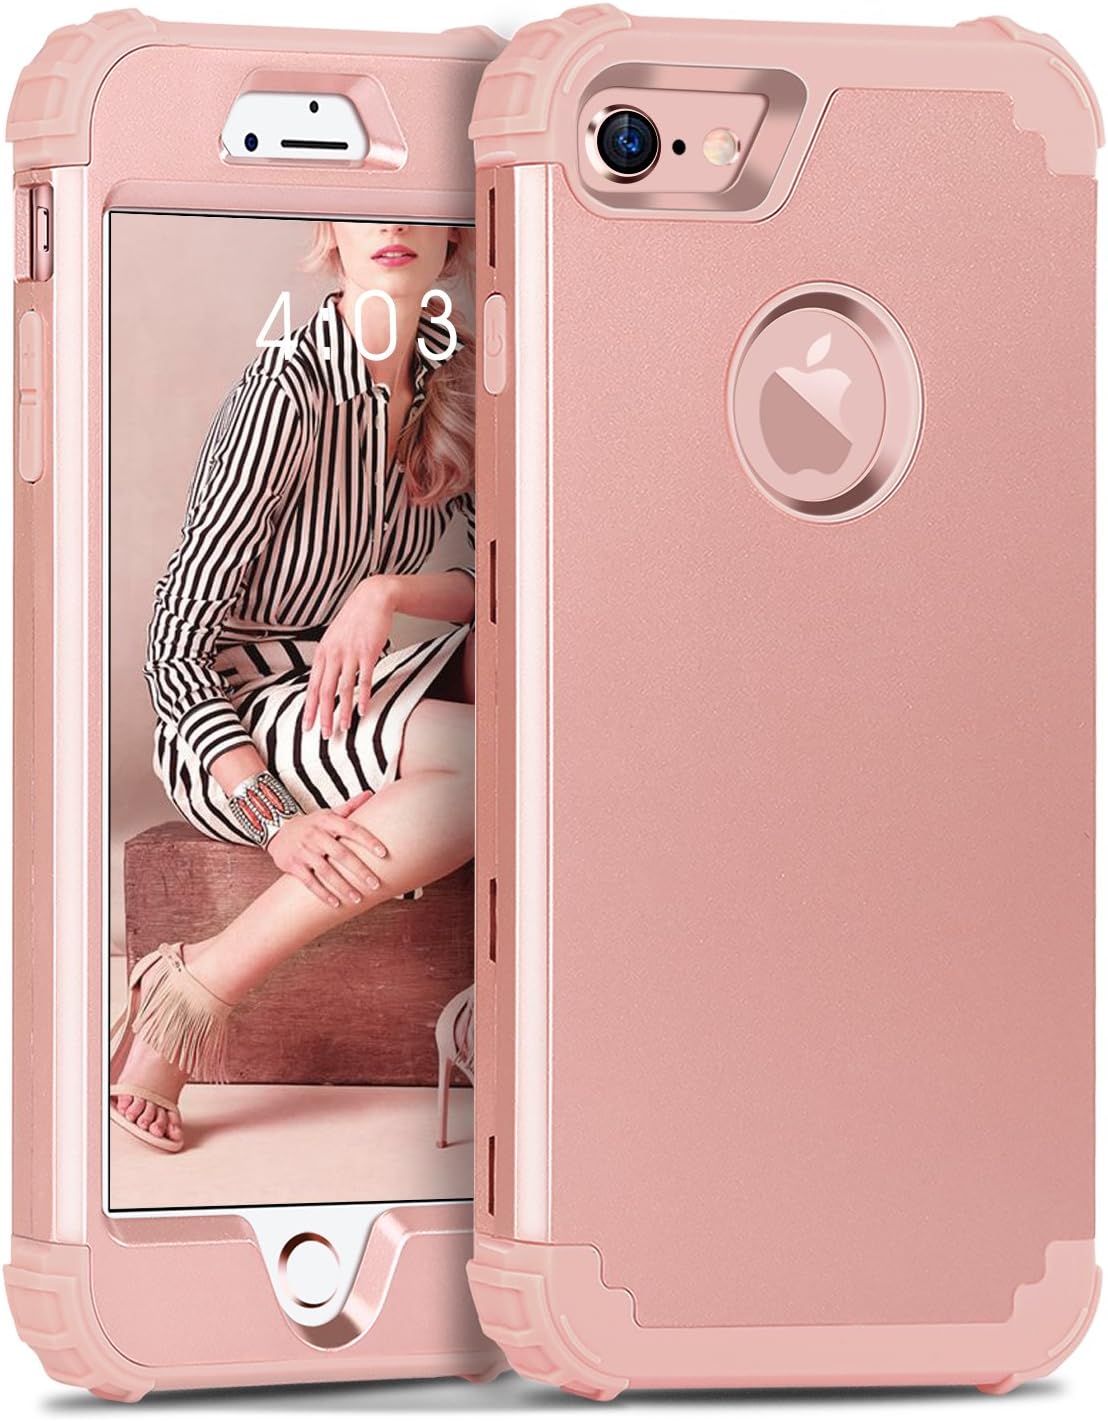 iPhone 8 Case, iPhone 7 Case, BENTOBEN 3 in 1 Hybrid Hard PC Cover & Soft Silicone Bumper Heavy Duty Slim Shockproof Full Body Rugged Protective Phone Case for iPhone 7 & iPhone 8 (4.7Inch), Rose Gold